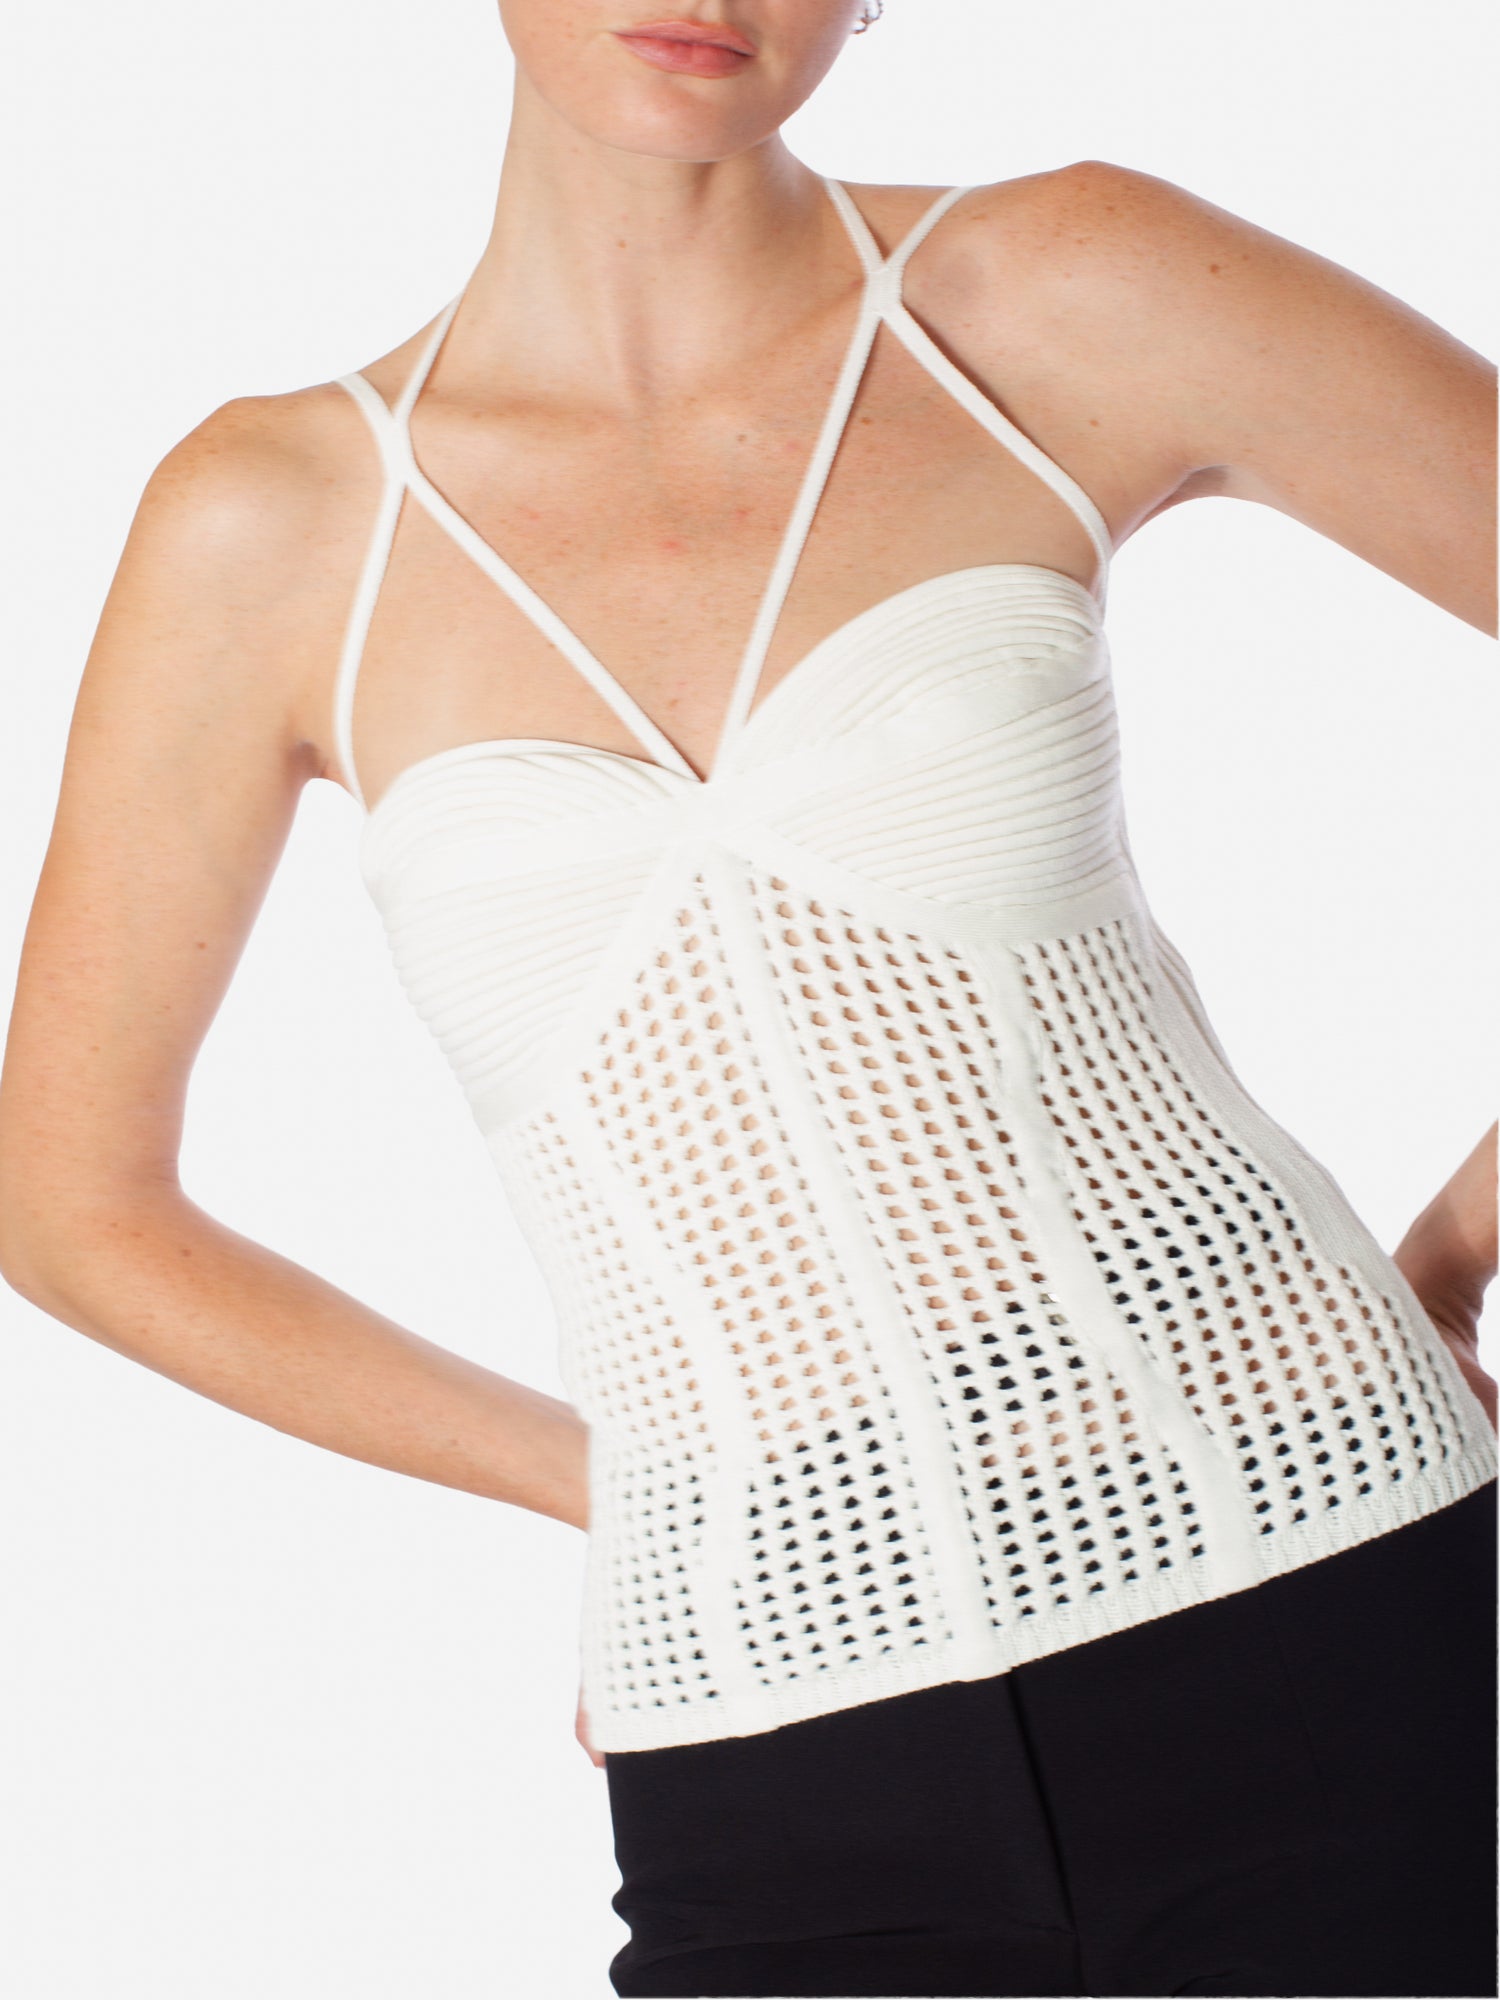 ANDREADAMO Fishnet Knit Corset Top With Spiral Details – SHOPCURVE